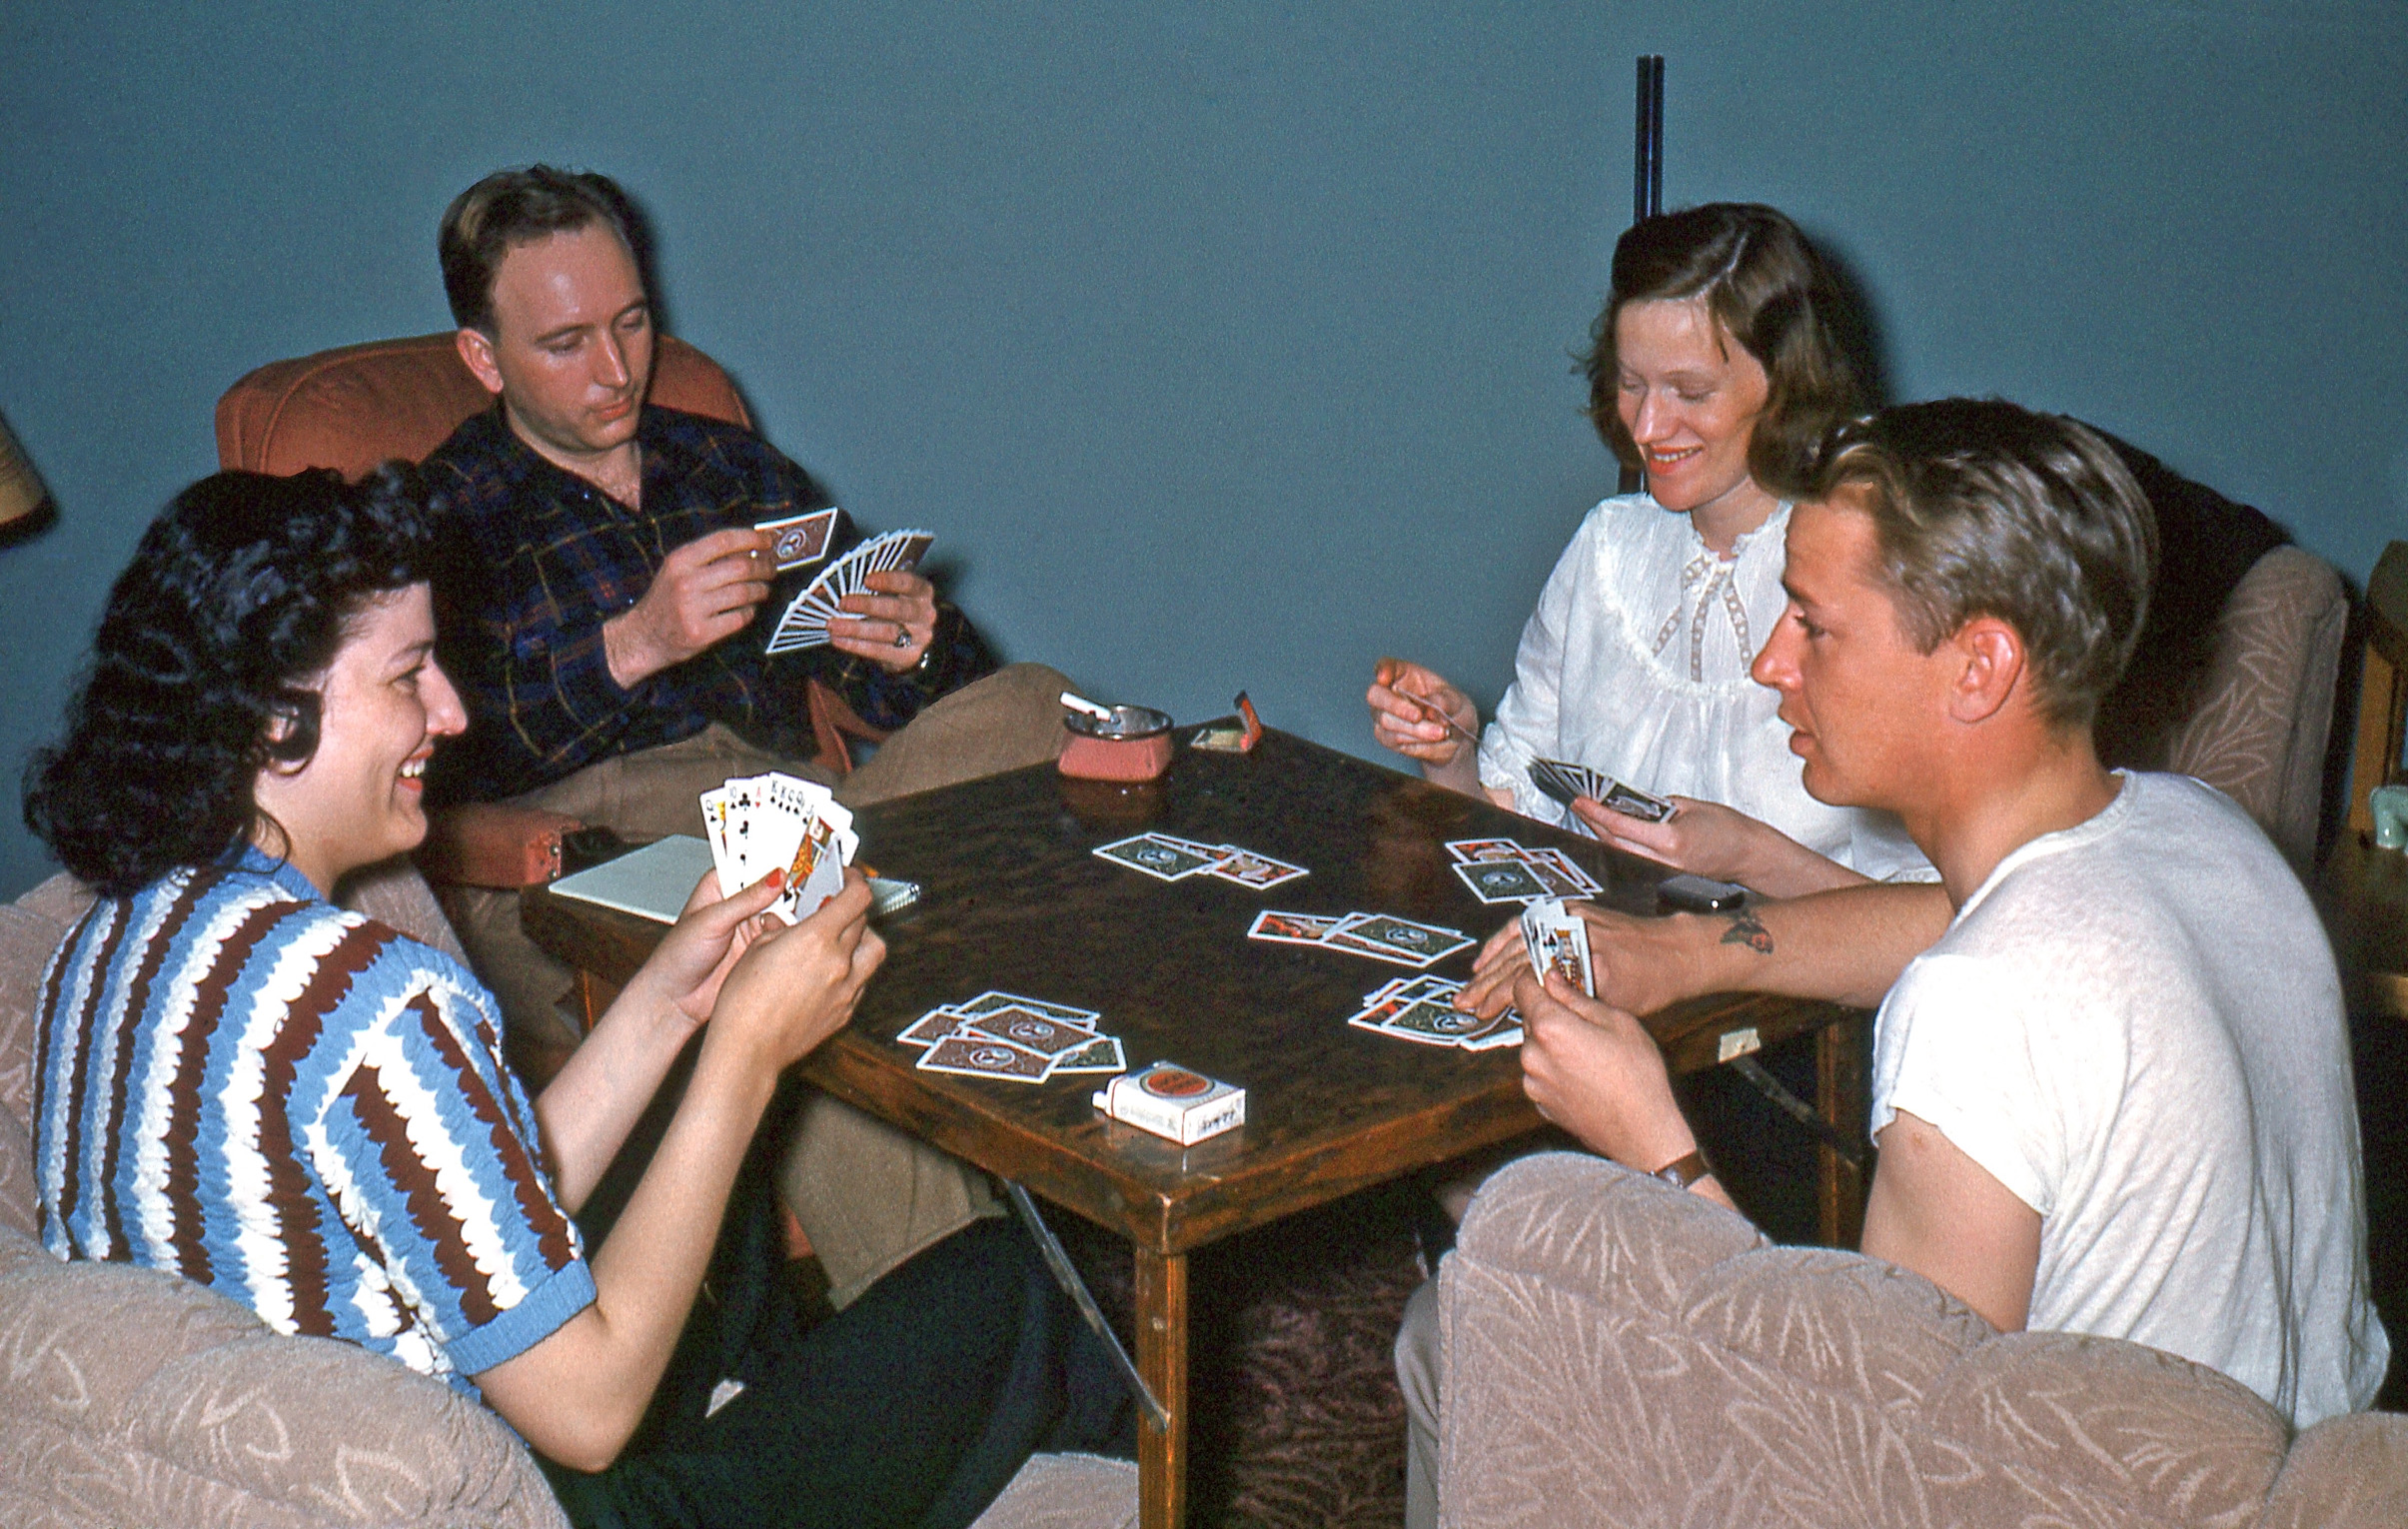 Somewhere in the 1950s, with a hand that seems suspiciously good. Another Kodachrome slide from the same box as These Three and Dressed to Smoke, found in a thrift store. View full size.